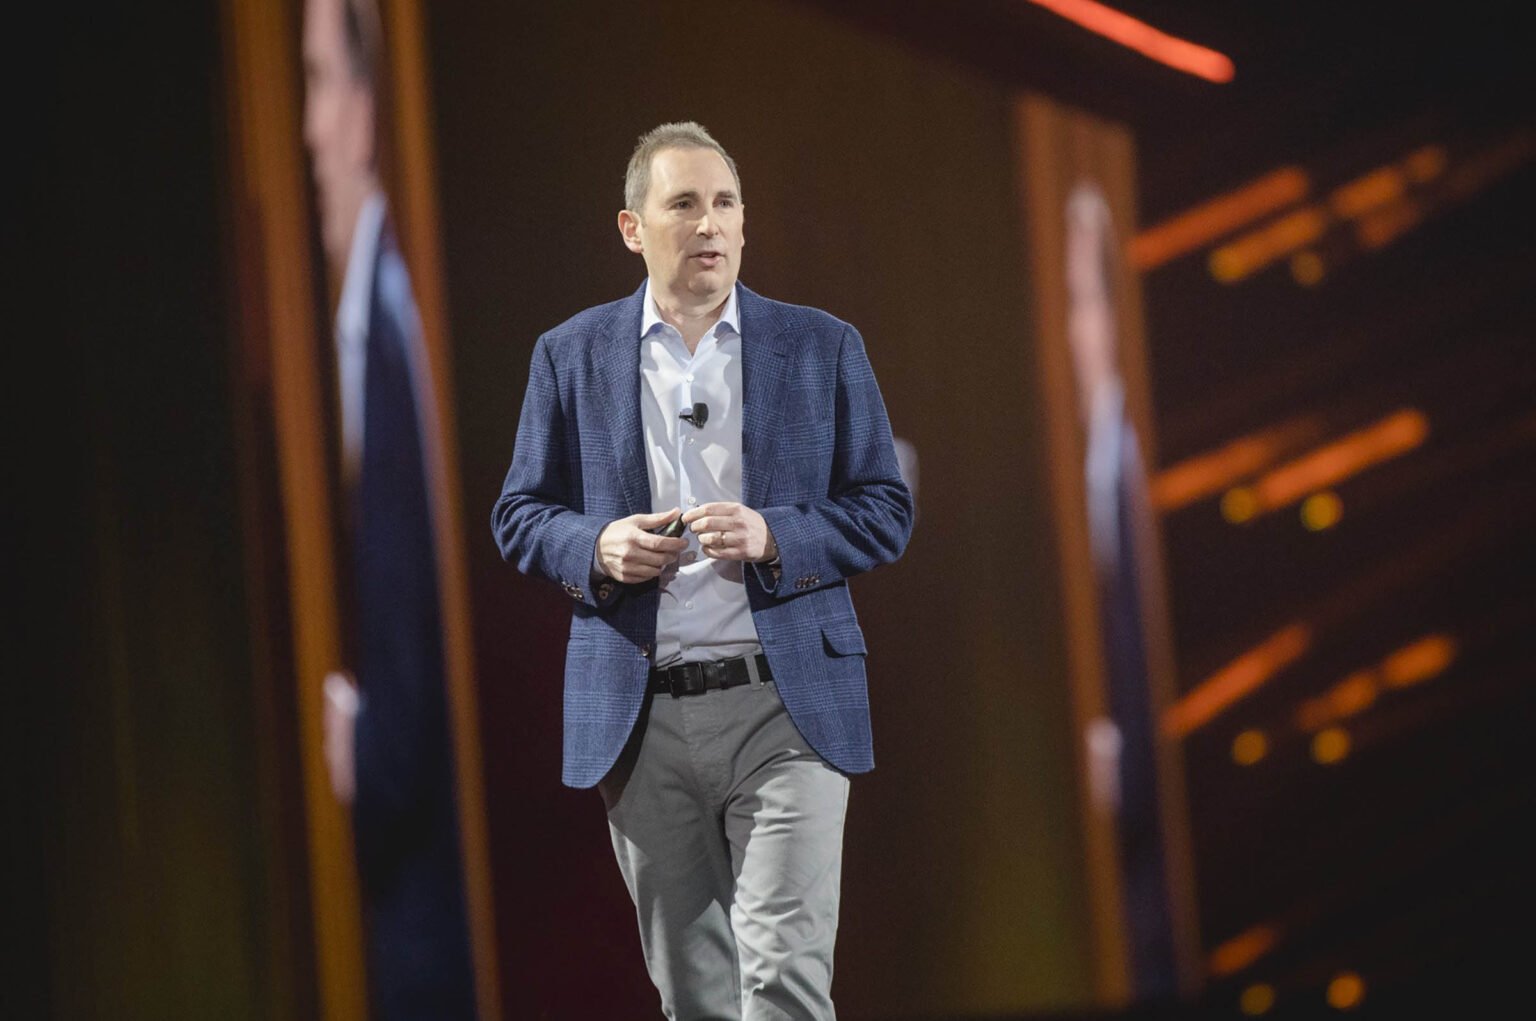 Andy Jassy will take over as CEO of online retail behemoth Amazon. as Bezos steps down. Who is Andy Jassy?